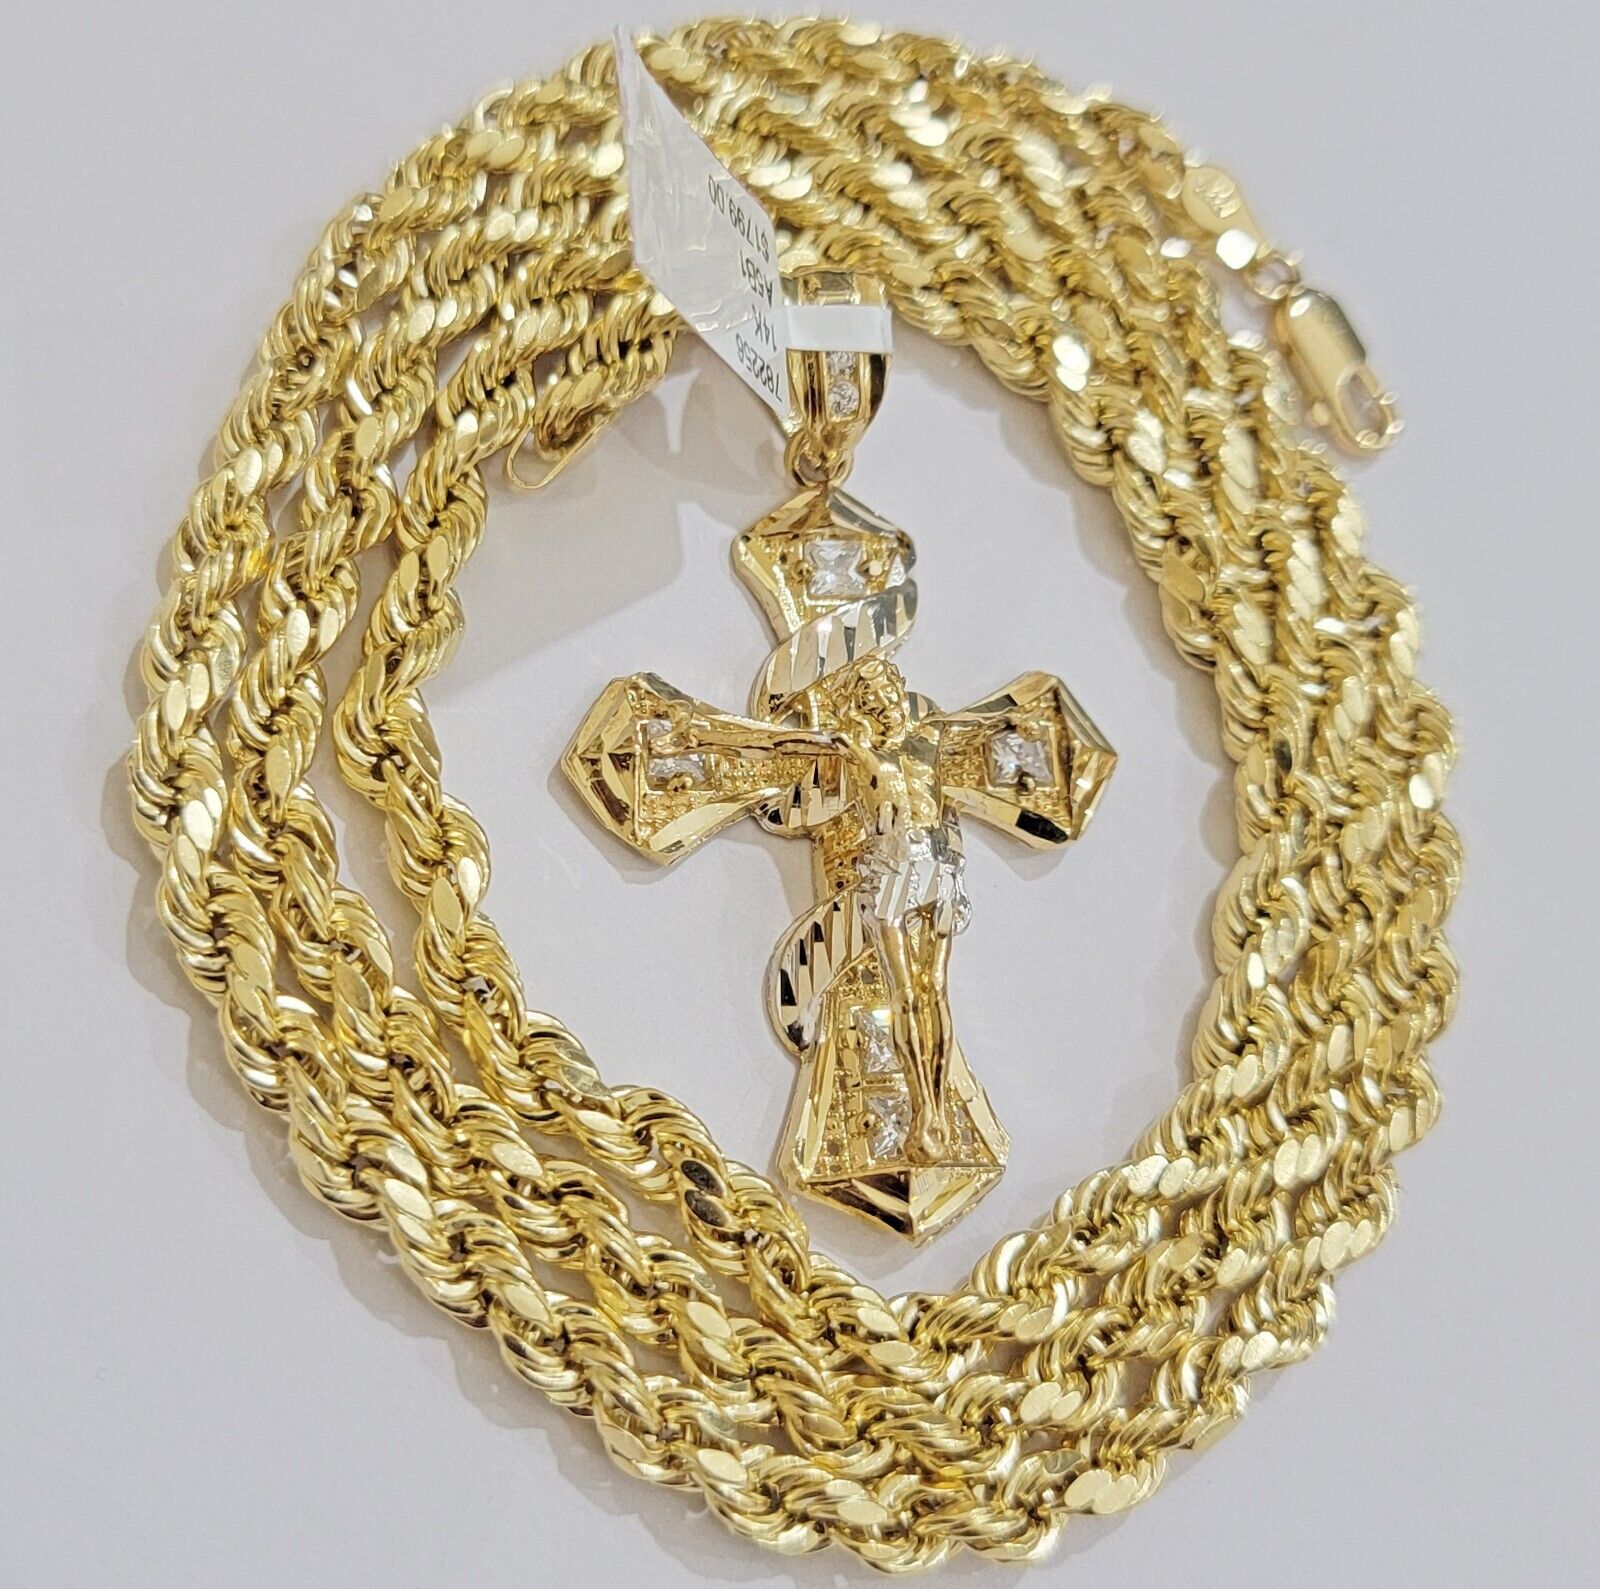 10k Gold Rope Chain Cross Charm Set Necklace 24" inch 5mm Jesus Pendant REAL 10K